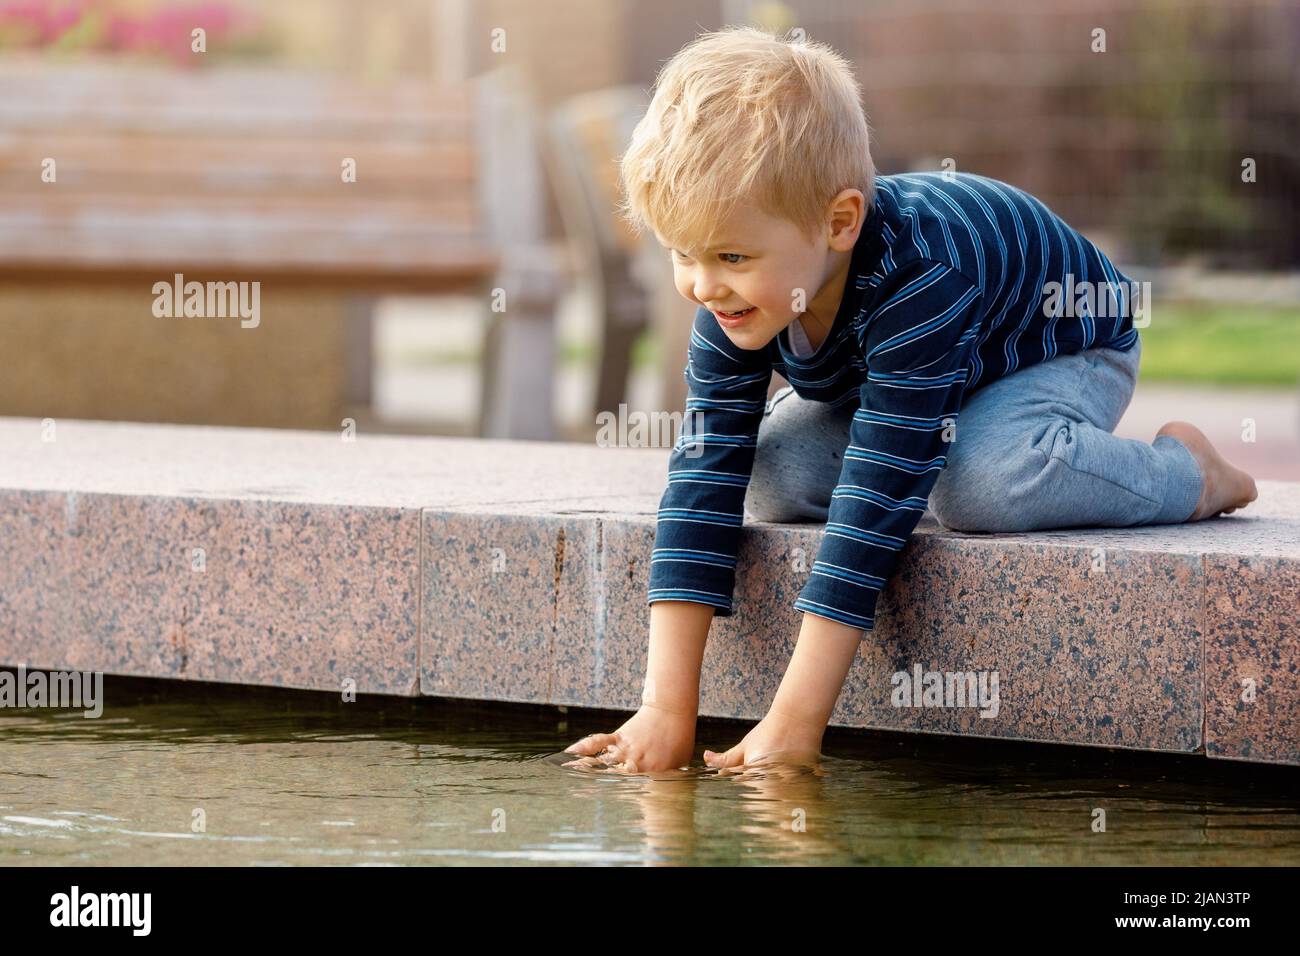 Portrait of adorable 3 years old toddler boy touching water in fountain at park. Stock Photo